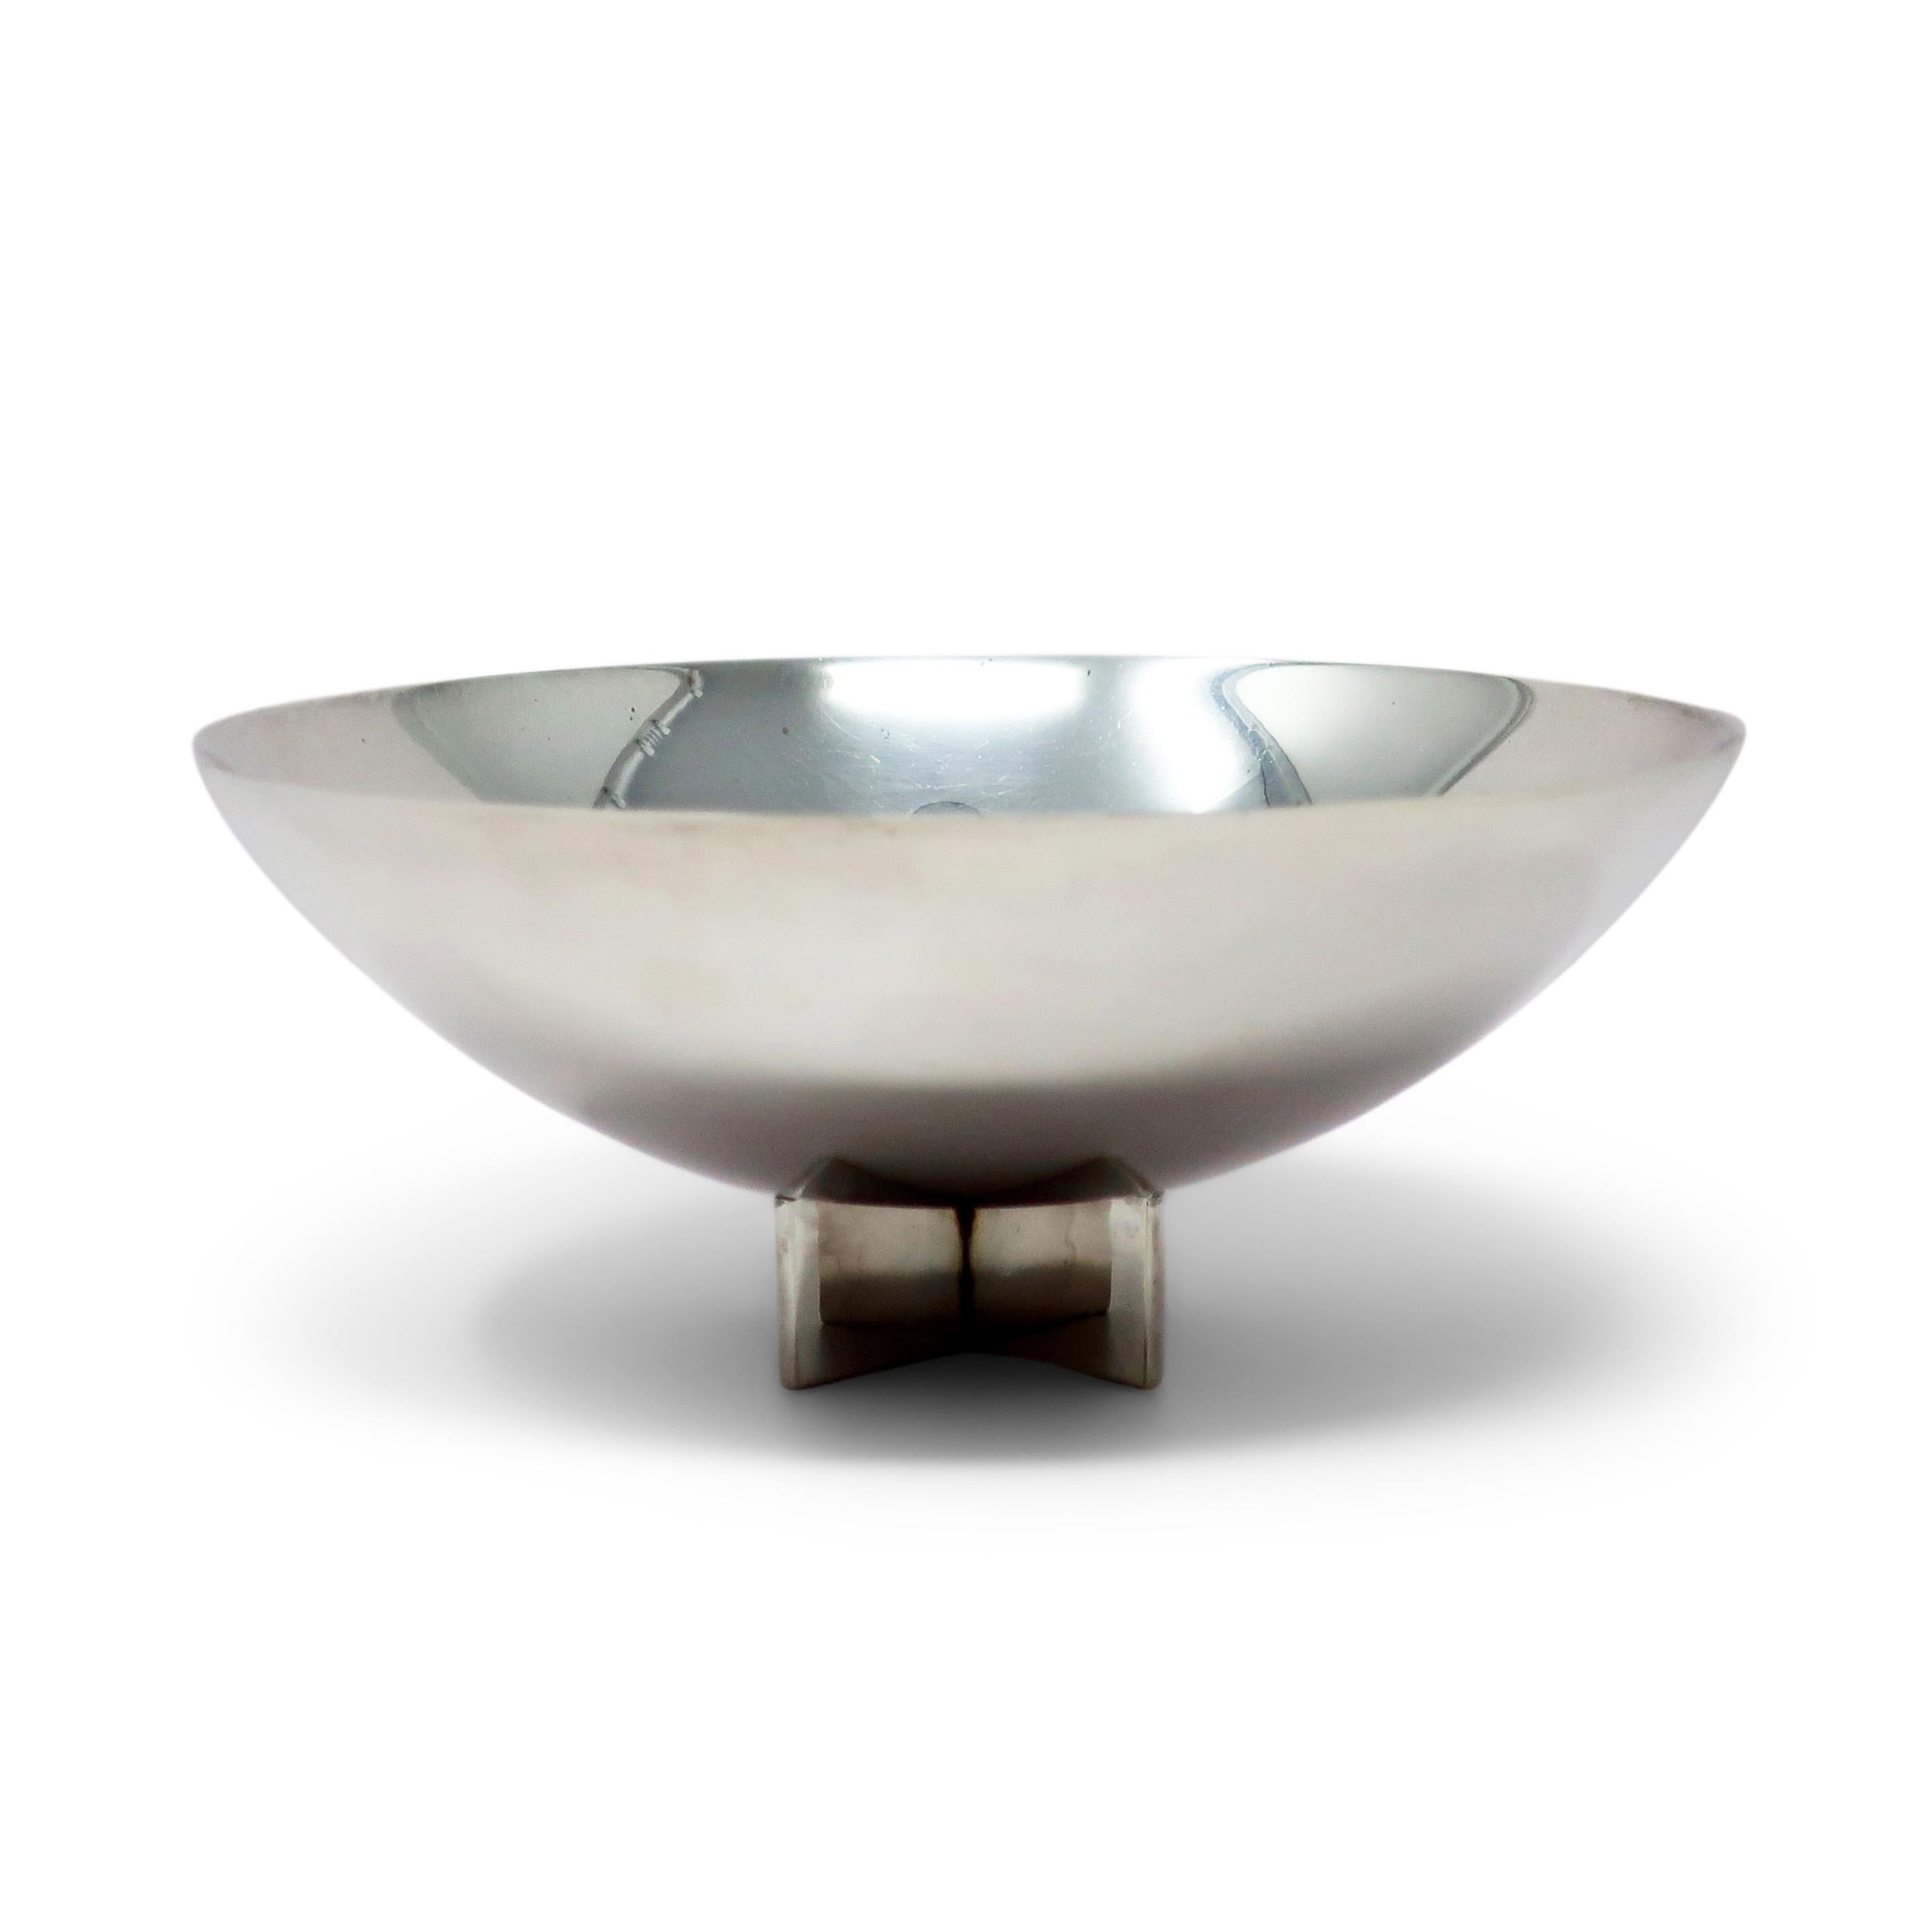 Sometimes referred to as the Cross Bowl and other times as the X-Base Bowl, this postmodern silver-plated bowl is one of Richard Meier’s simplest and most iconic designs for Swid Powell, the American housewares company renowned for collaborating